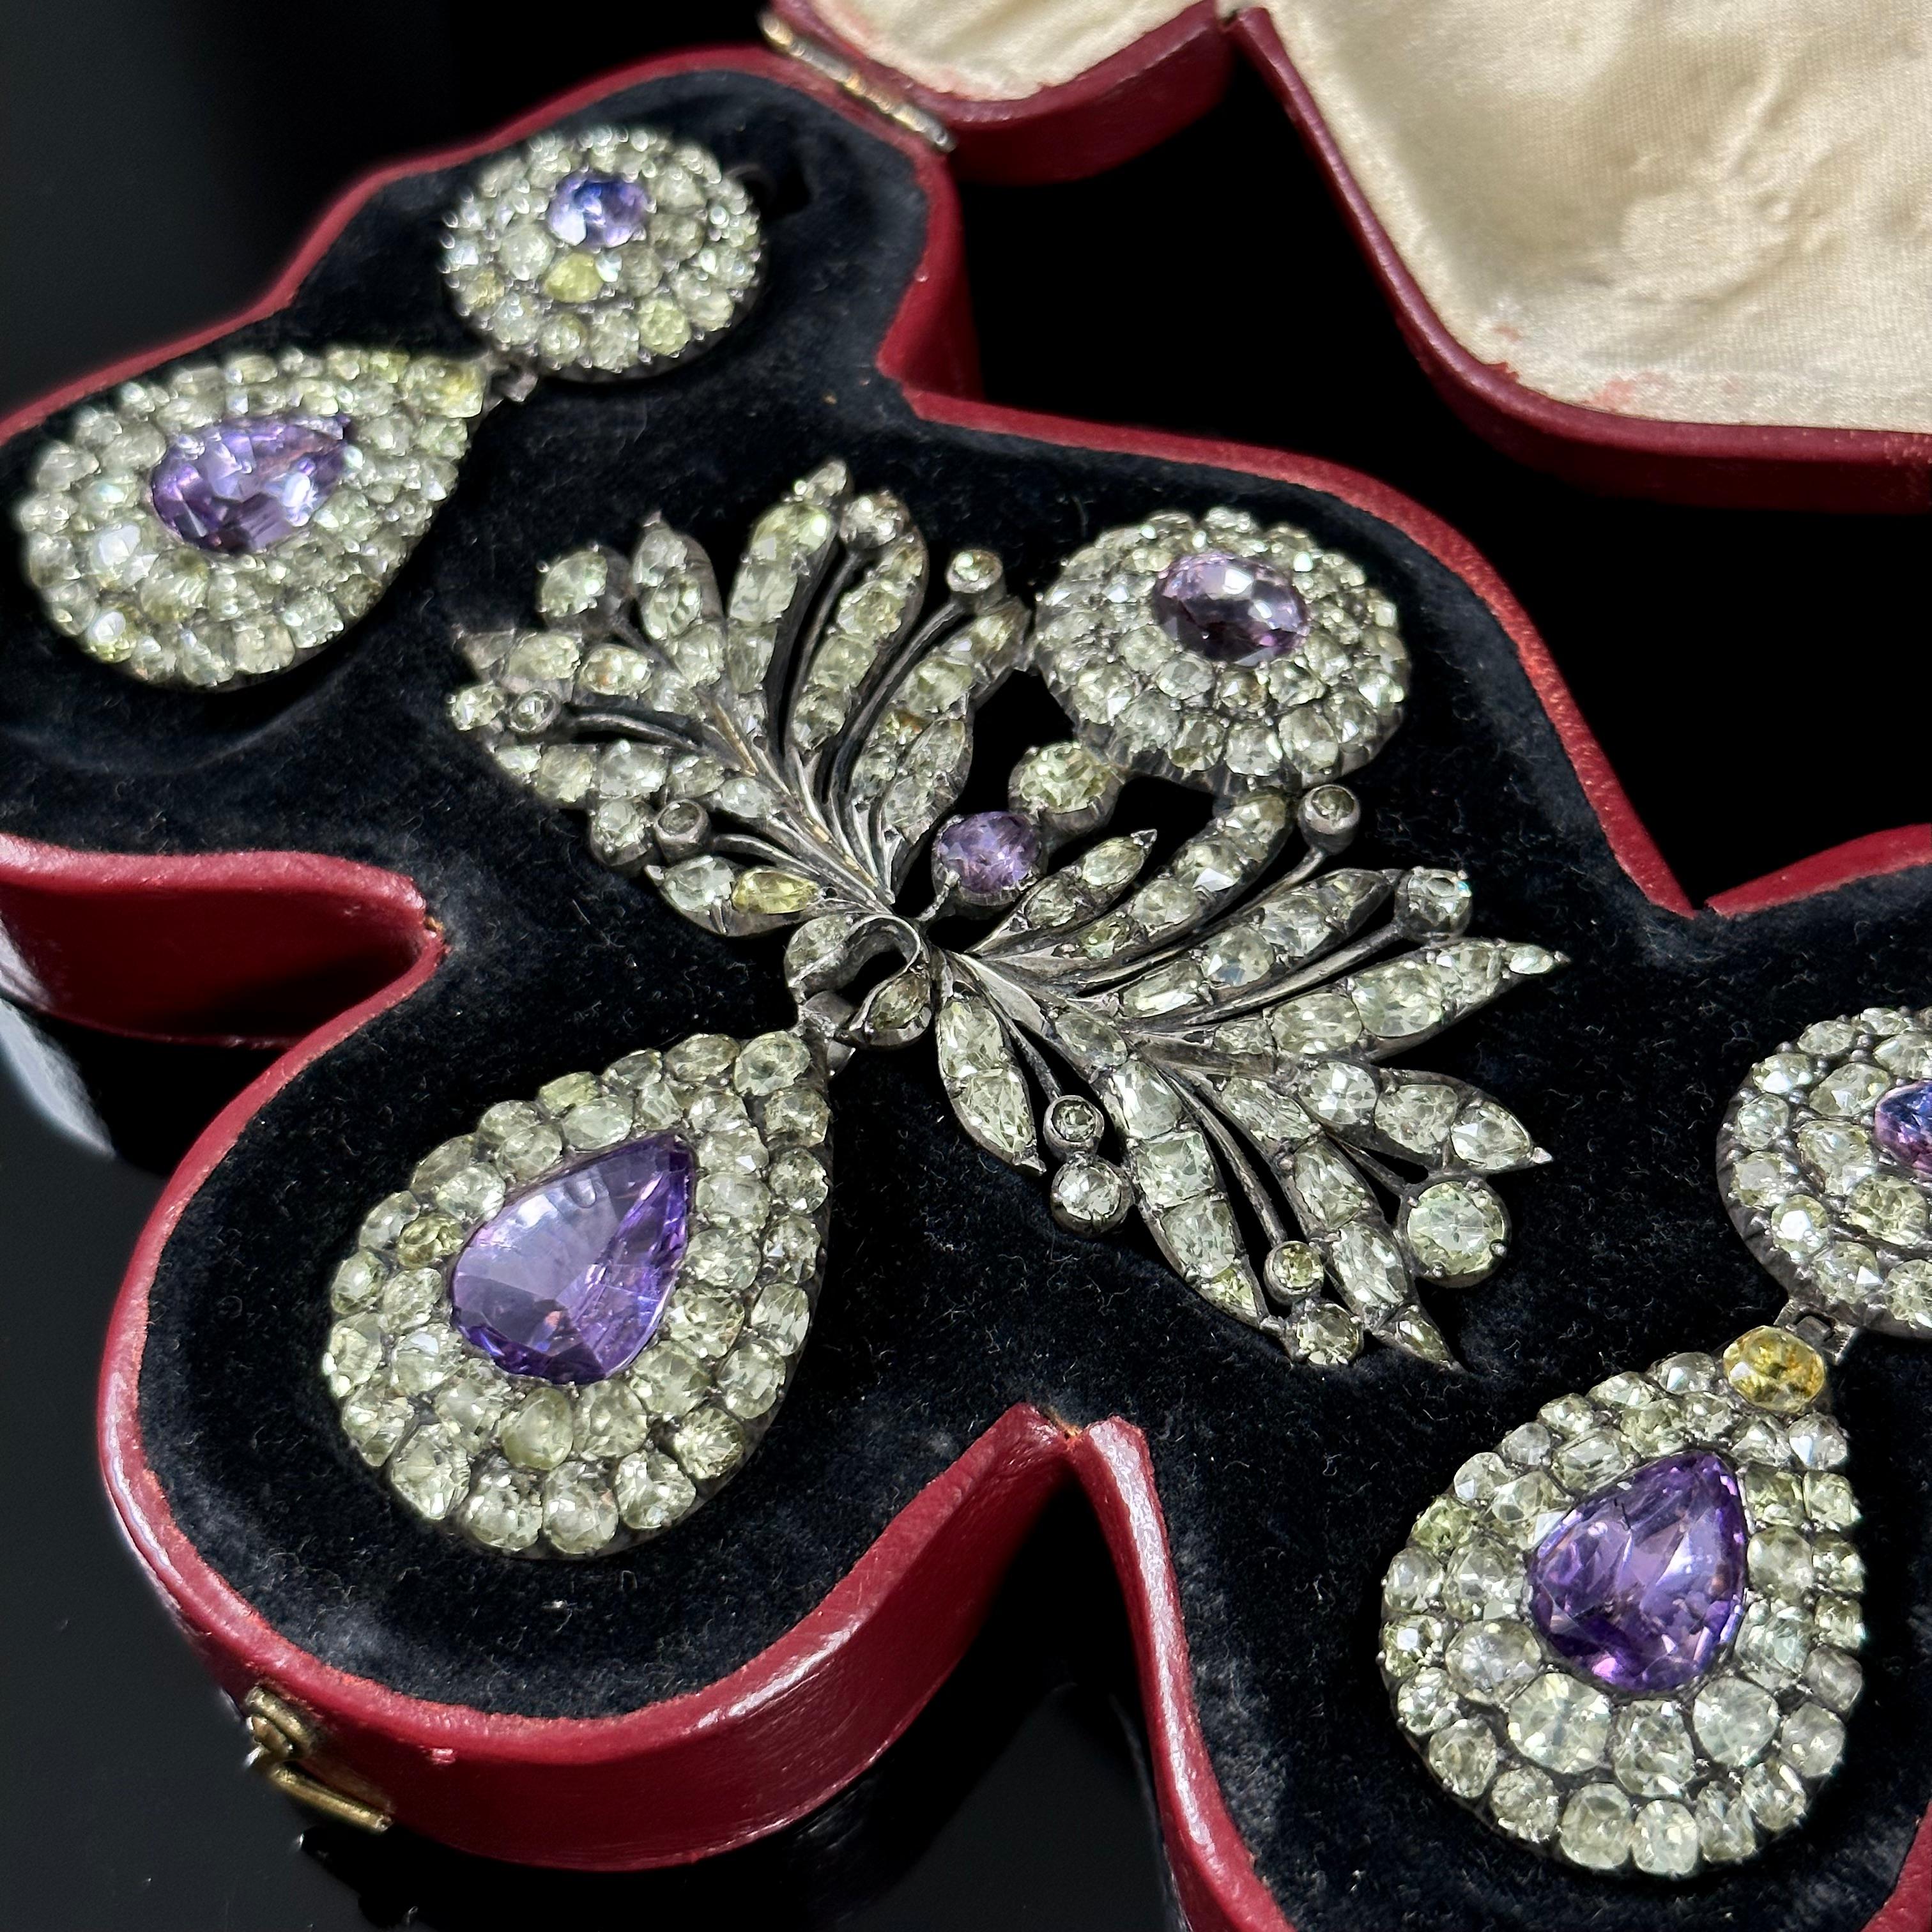 Antique Chrysolite Chrysoberyl Amethyst Brooch Earrings Silver Set Portuguese For Sale 1